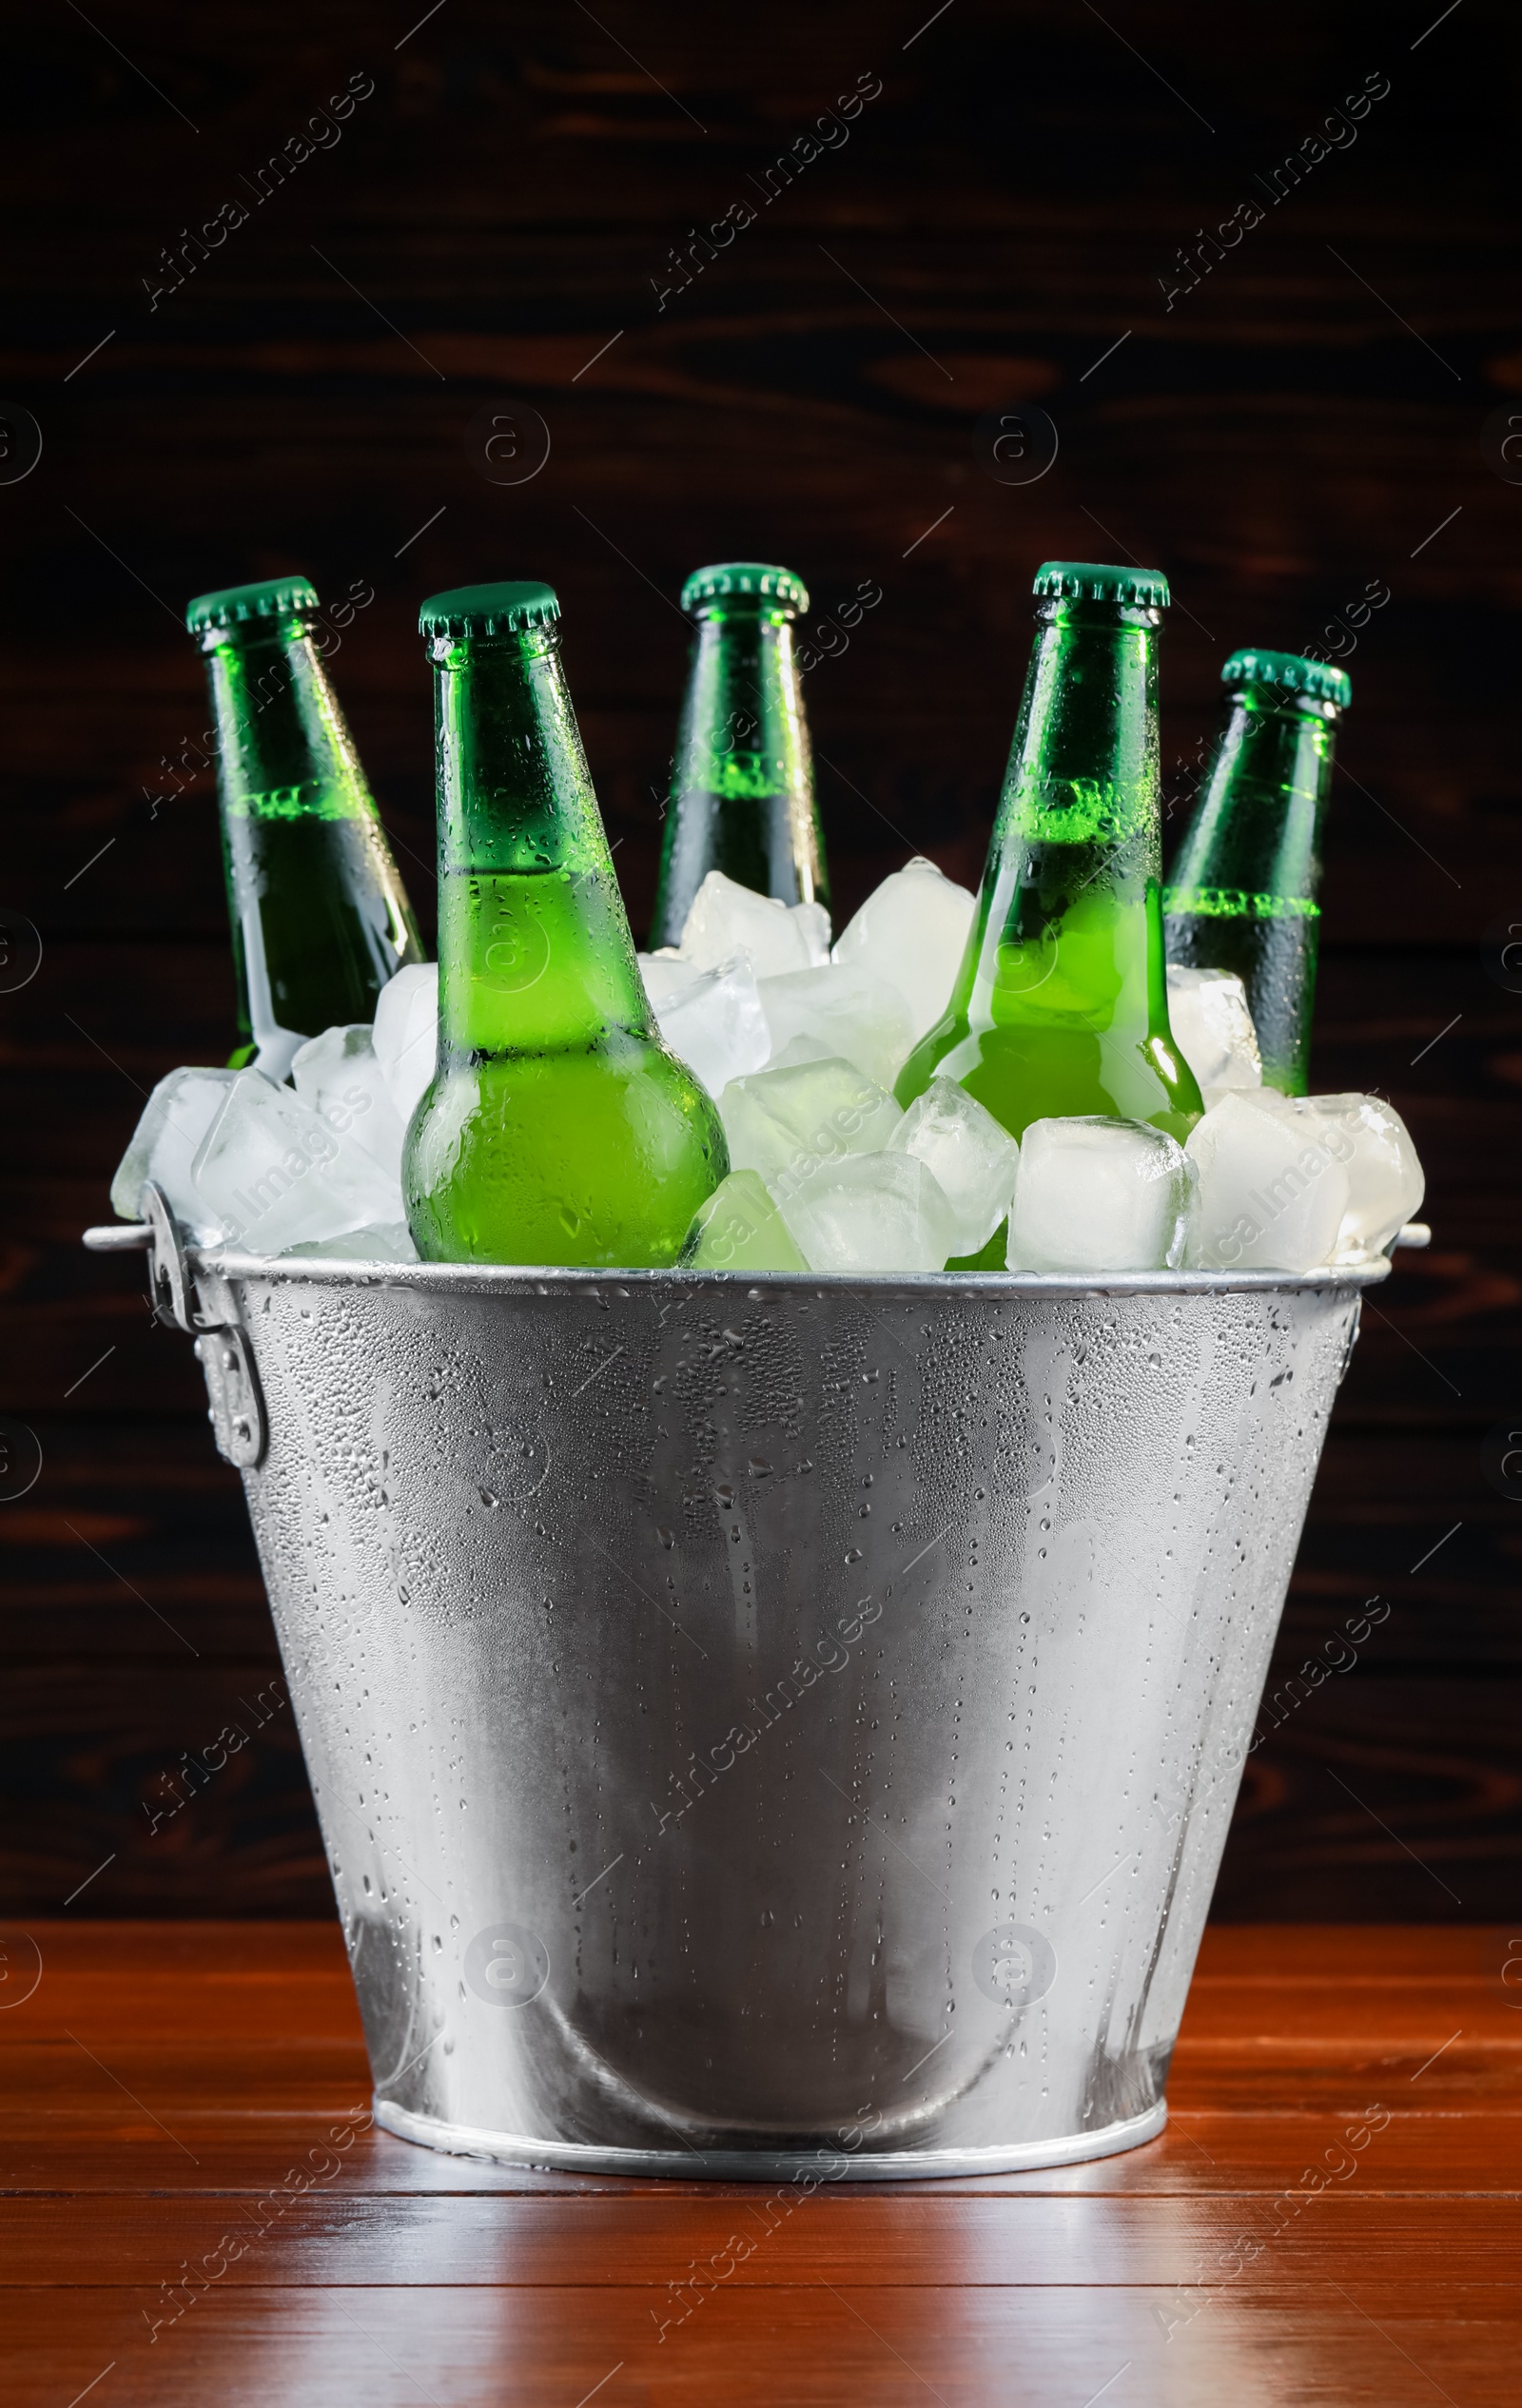 Photo of Metal bucket with bottles of beer and ice cubes on wooden background